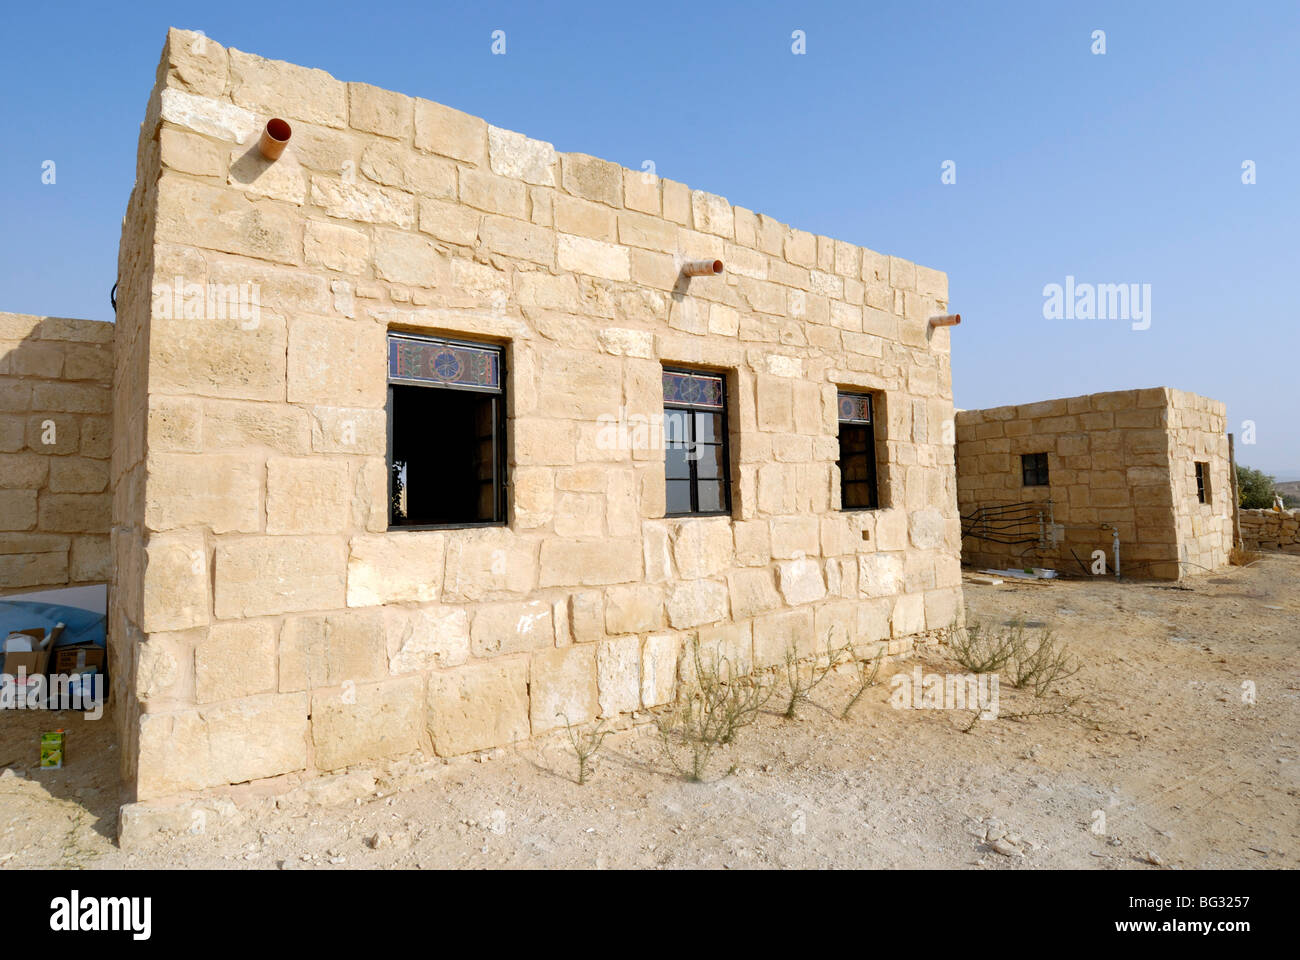 Israel, Negev, Shivta, a modern house built from local material using traditional building methods Stock Photo